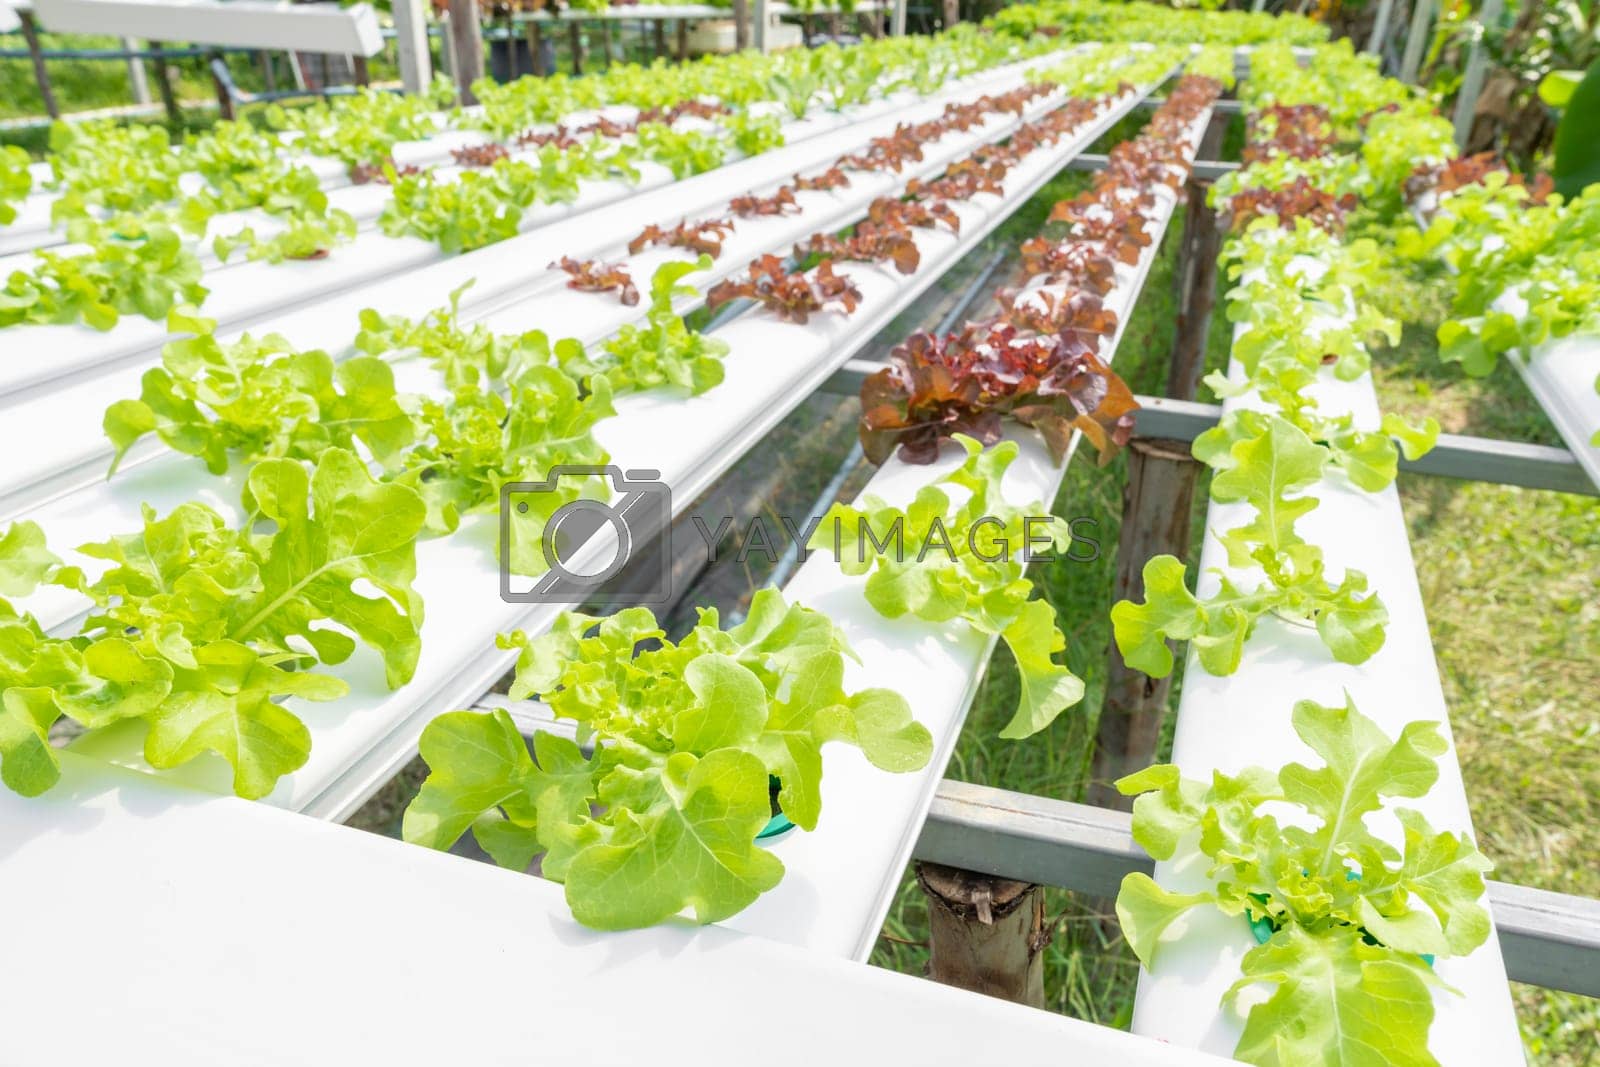 Royalty free image of The Hydroponics vegetables Green oak lettuce growing in plastic pipes at Smart farms with hydroponics systems by Gamjai